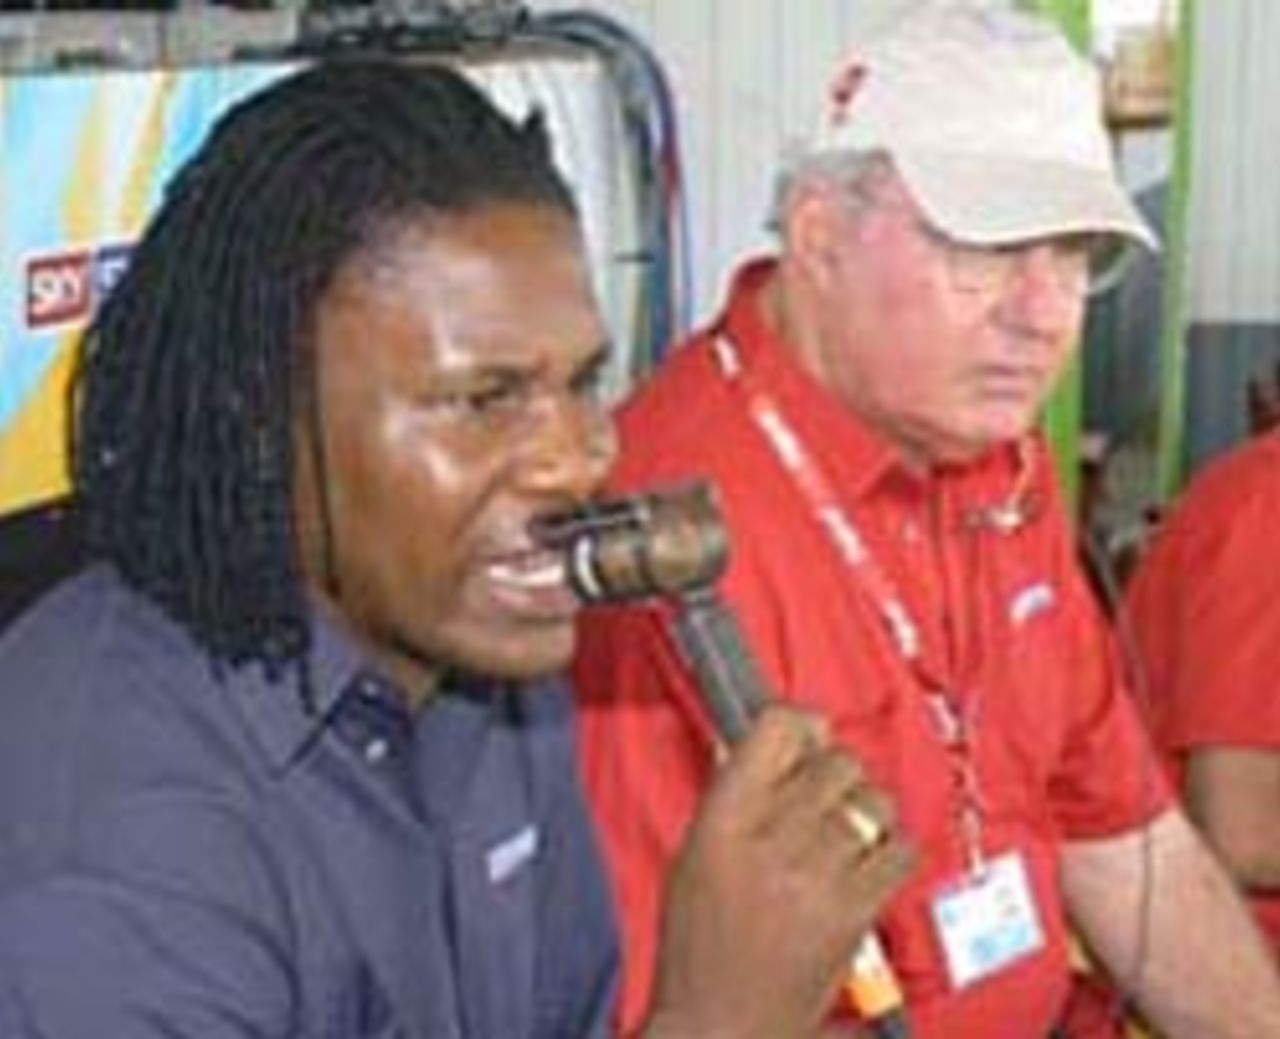 Pommie Mbangwa and Tony Cozier in the commentary box, Antigua, April 30, 2006